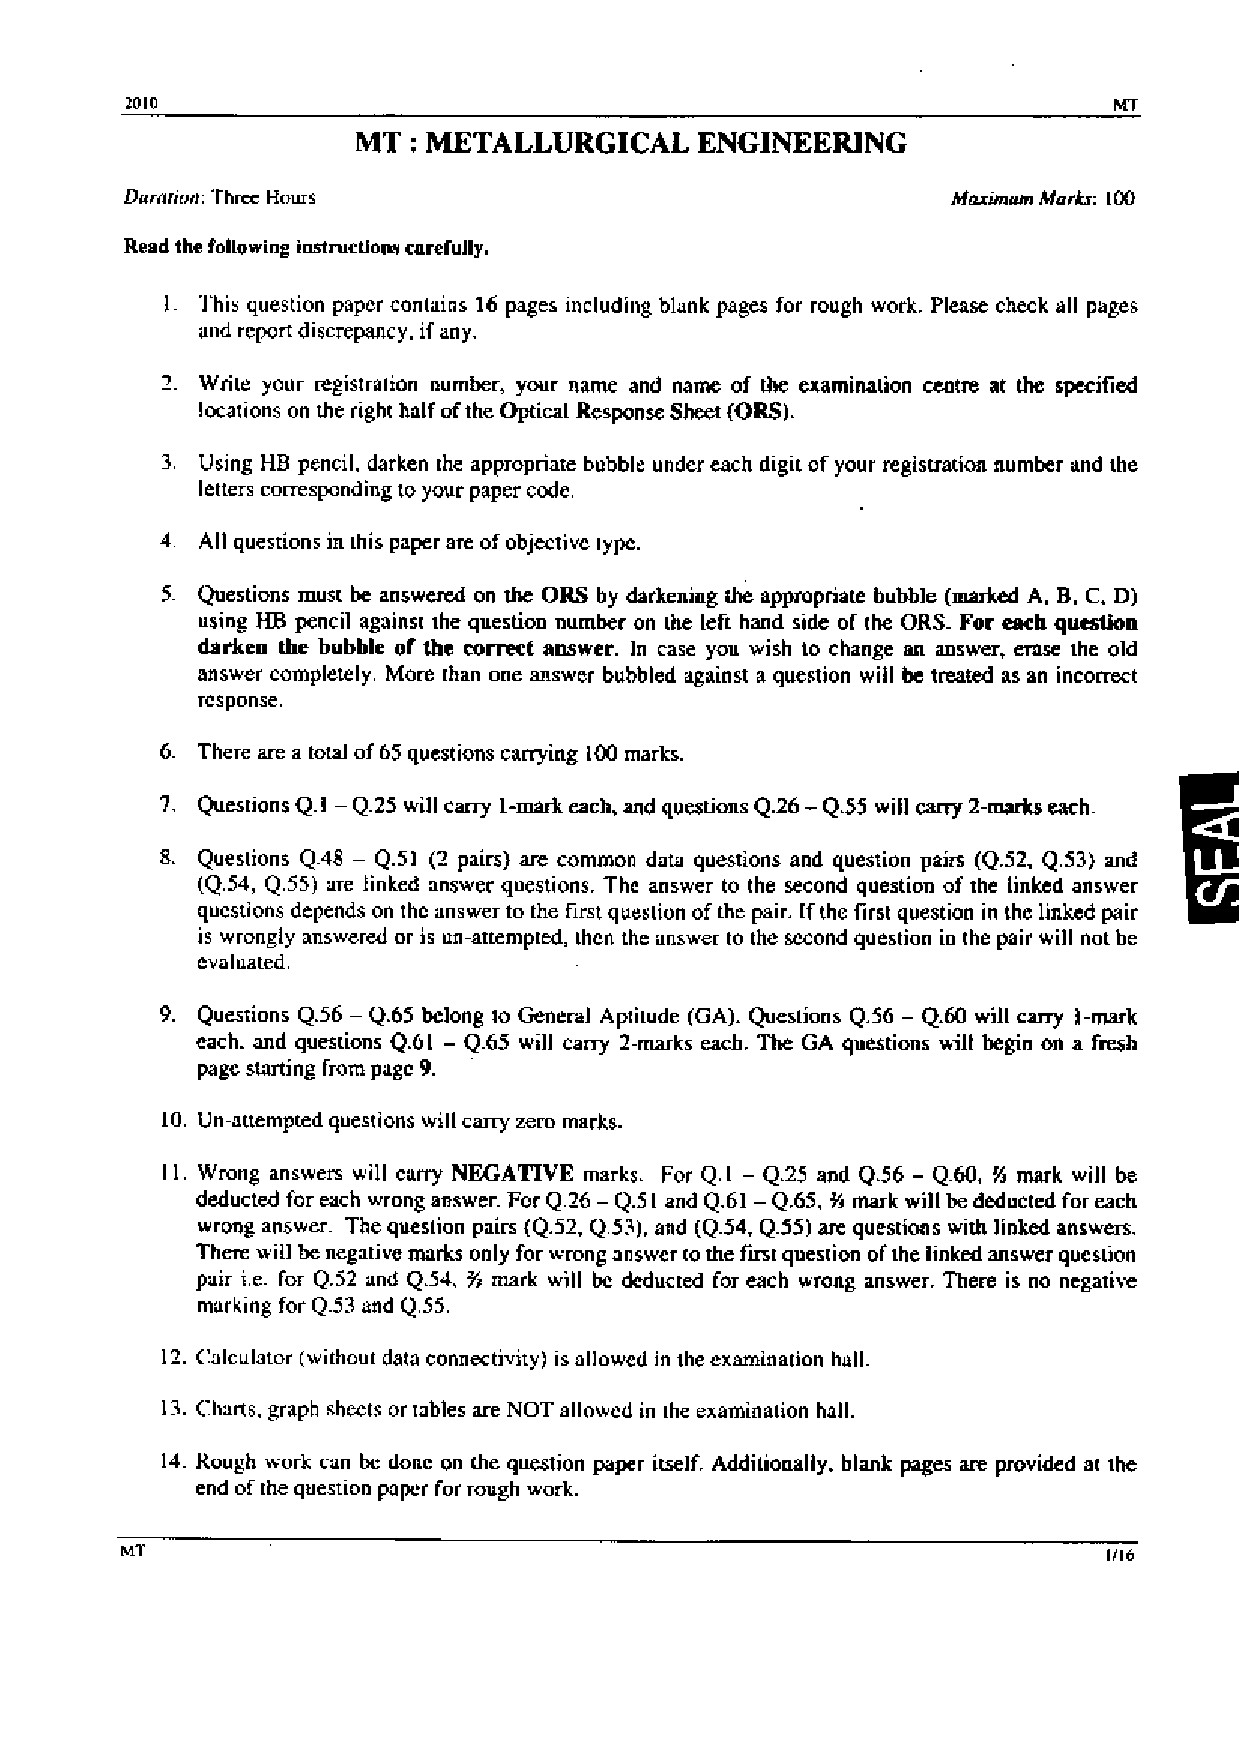 GATE Exam Question Paper 2010 Metallurgical Engineering 1